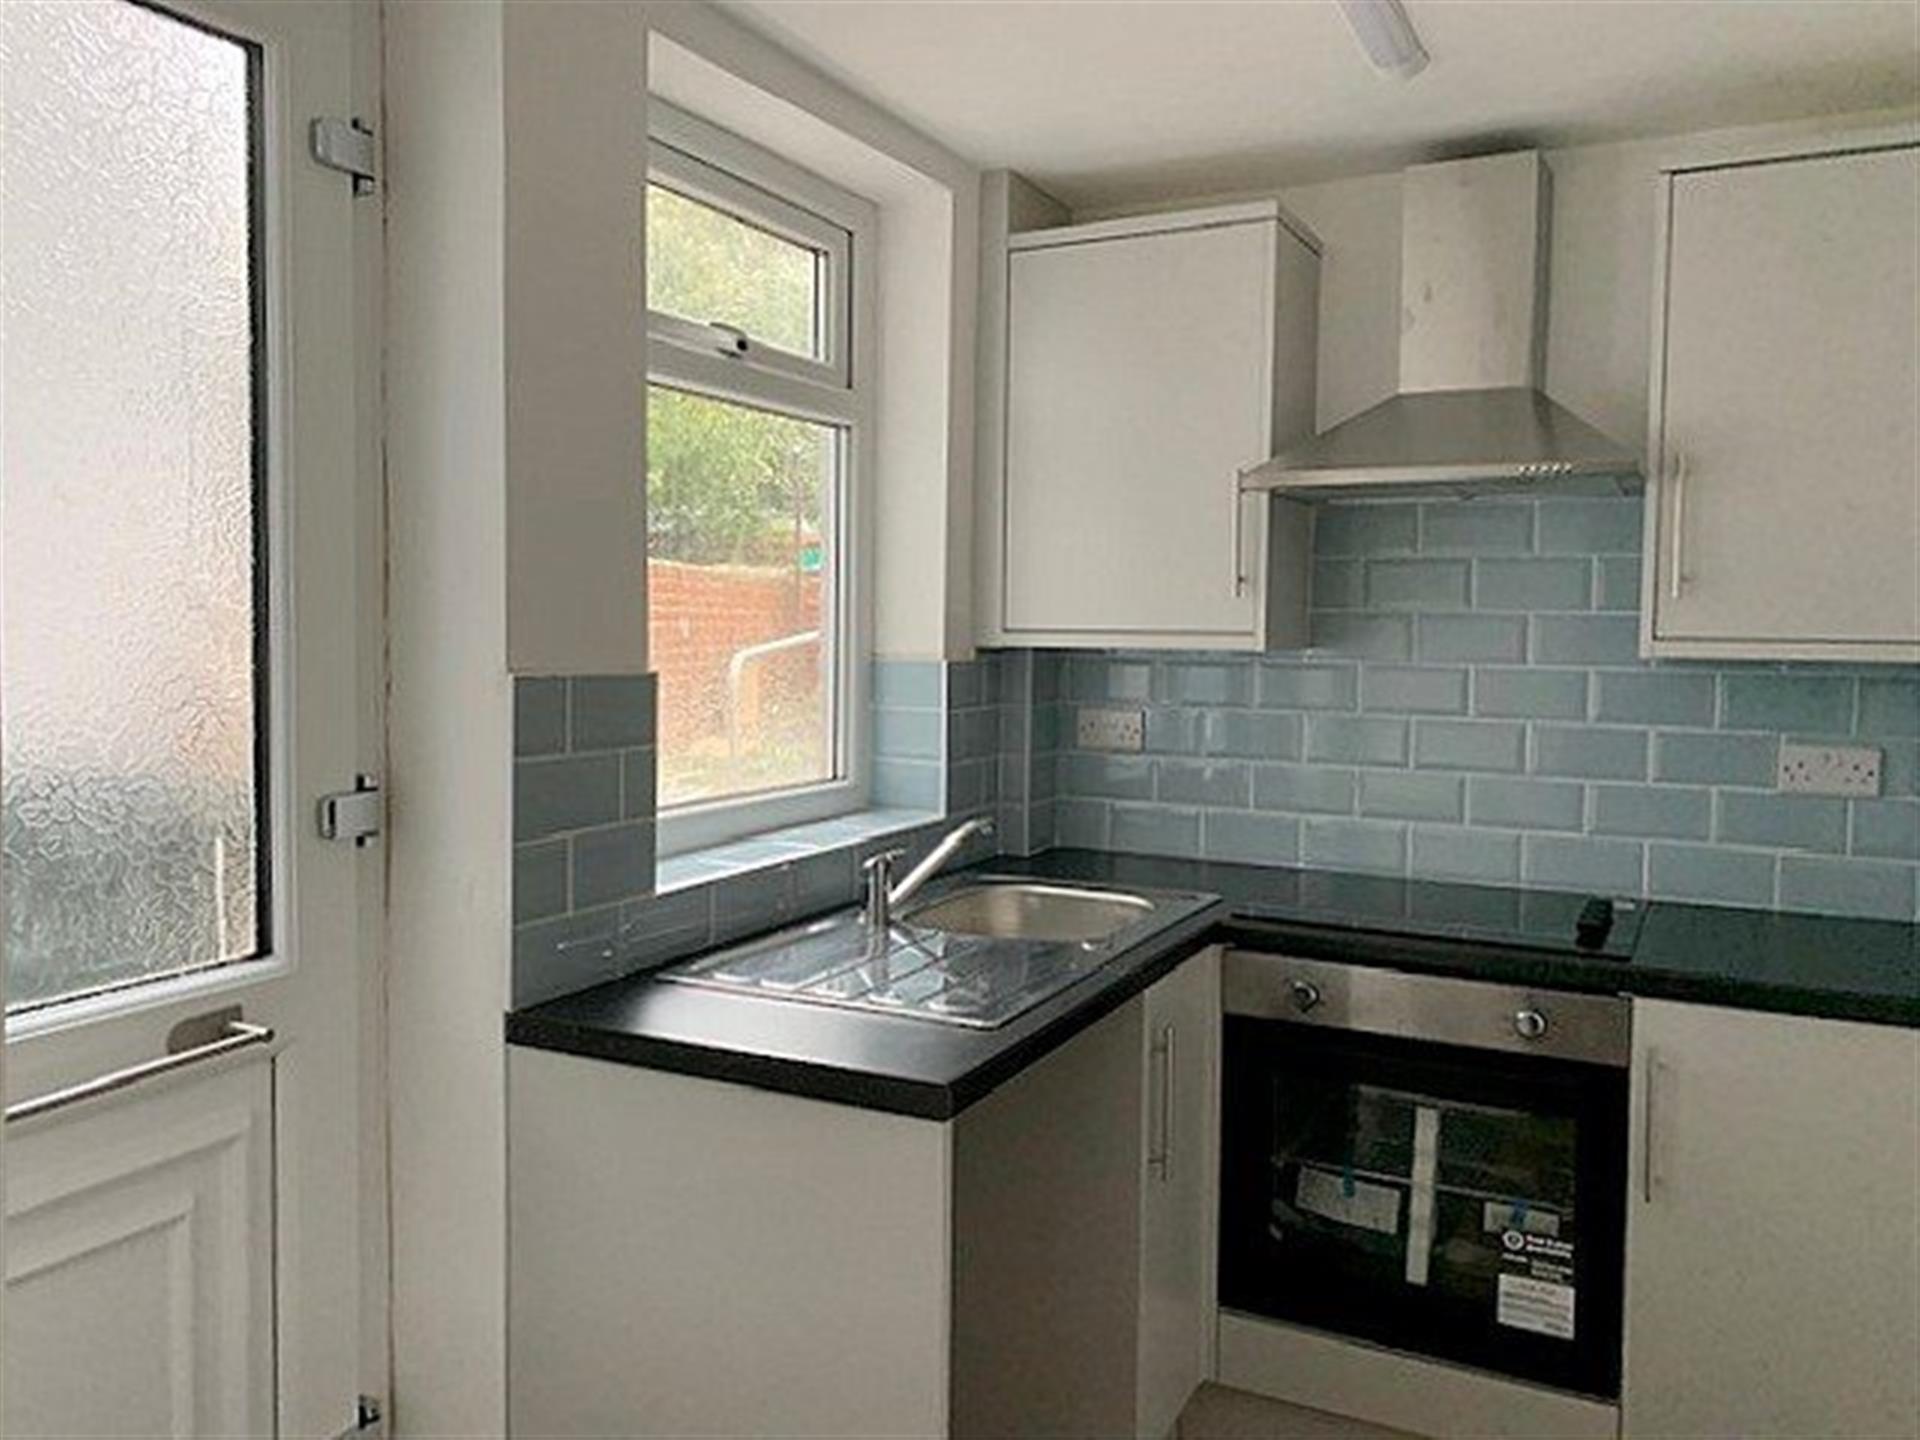 2 bedroom terraced house To Let in High Etherley - photograph 5.